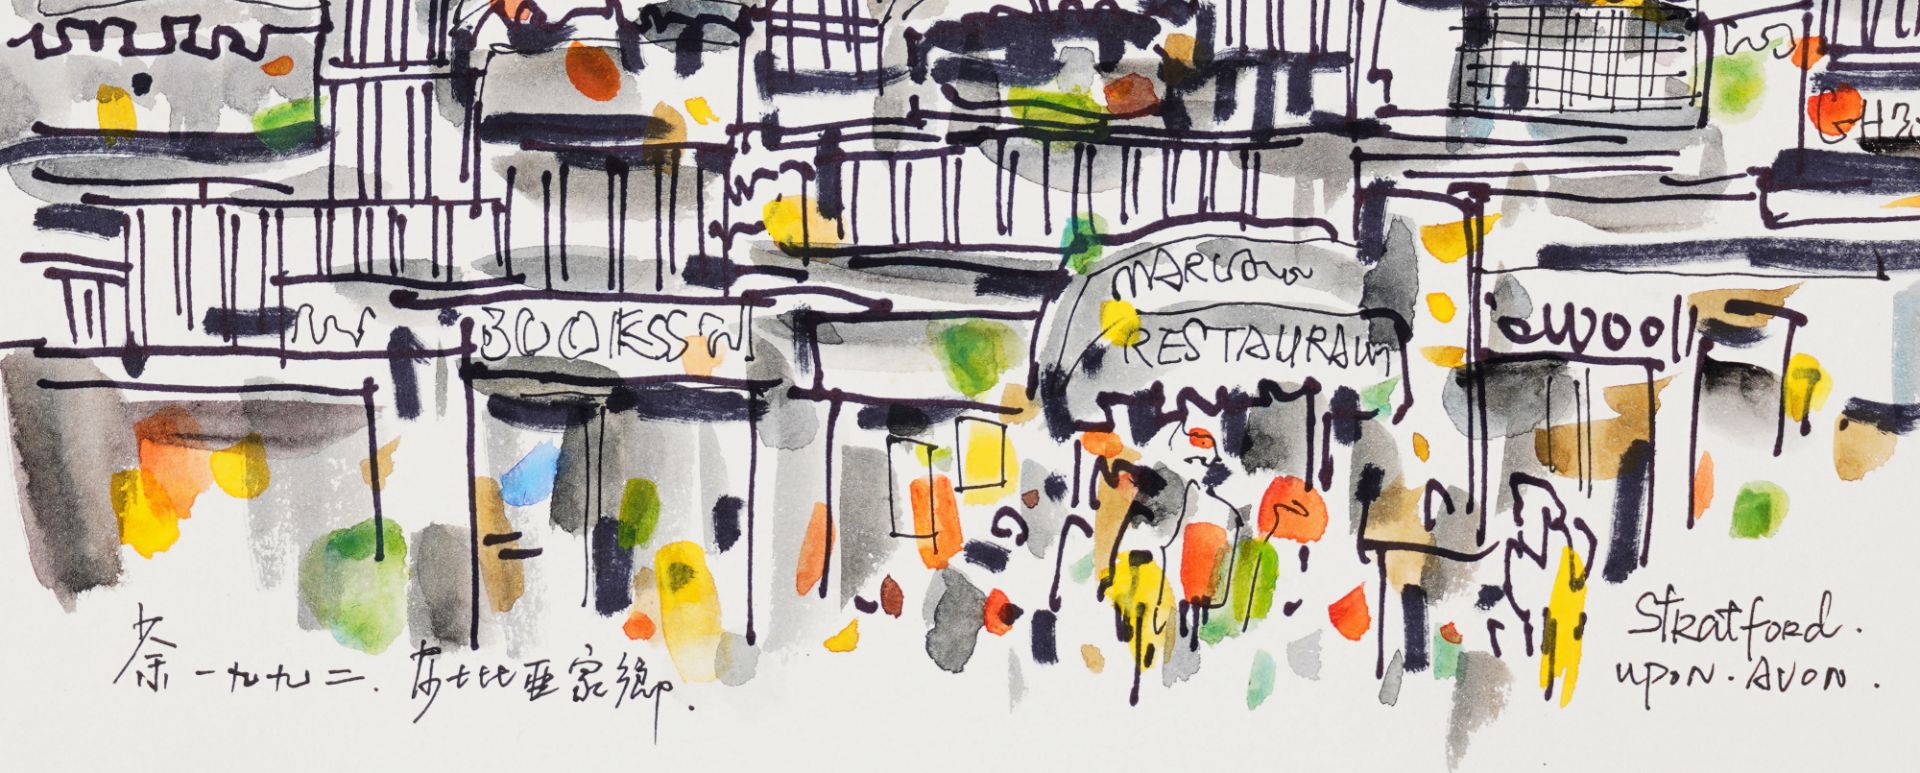 Wu Guanzhong (1919-2010), Ink with Watercolor on Paper - Image 2 of 2